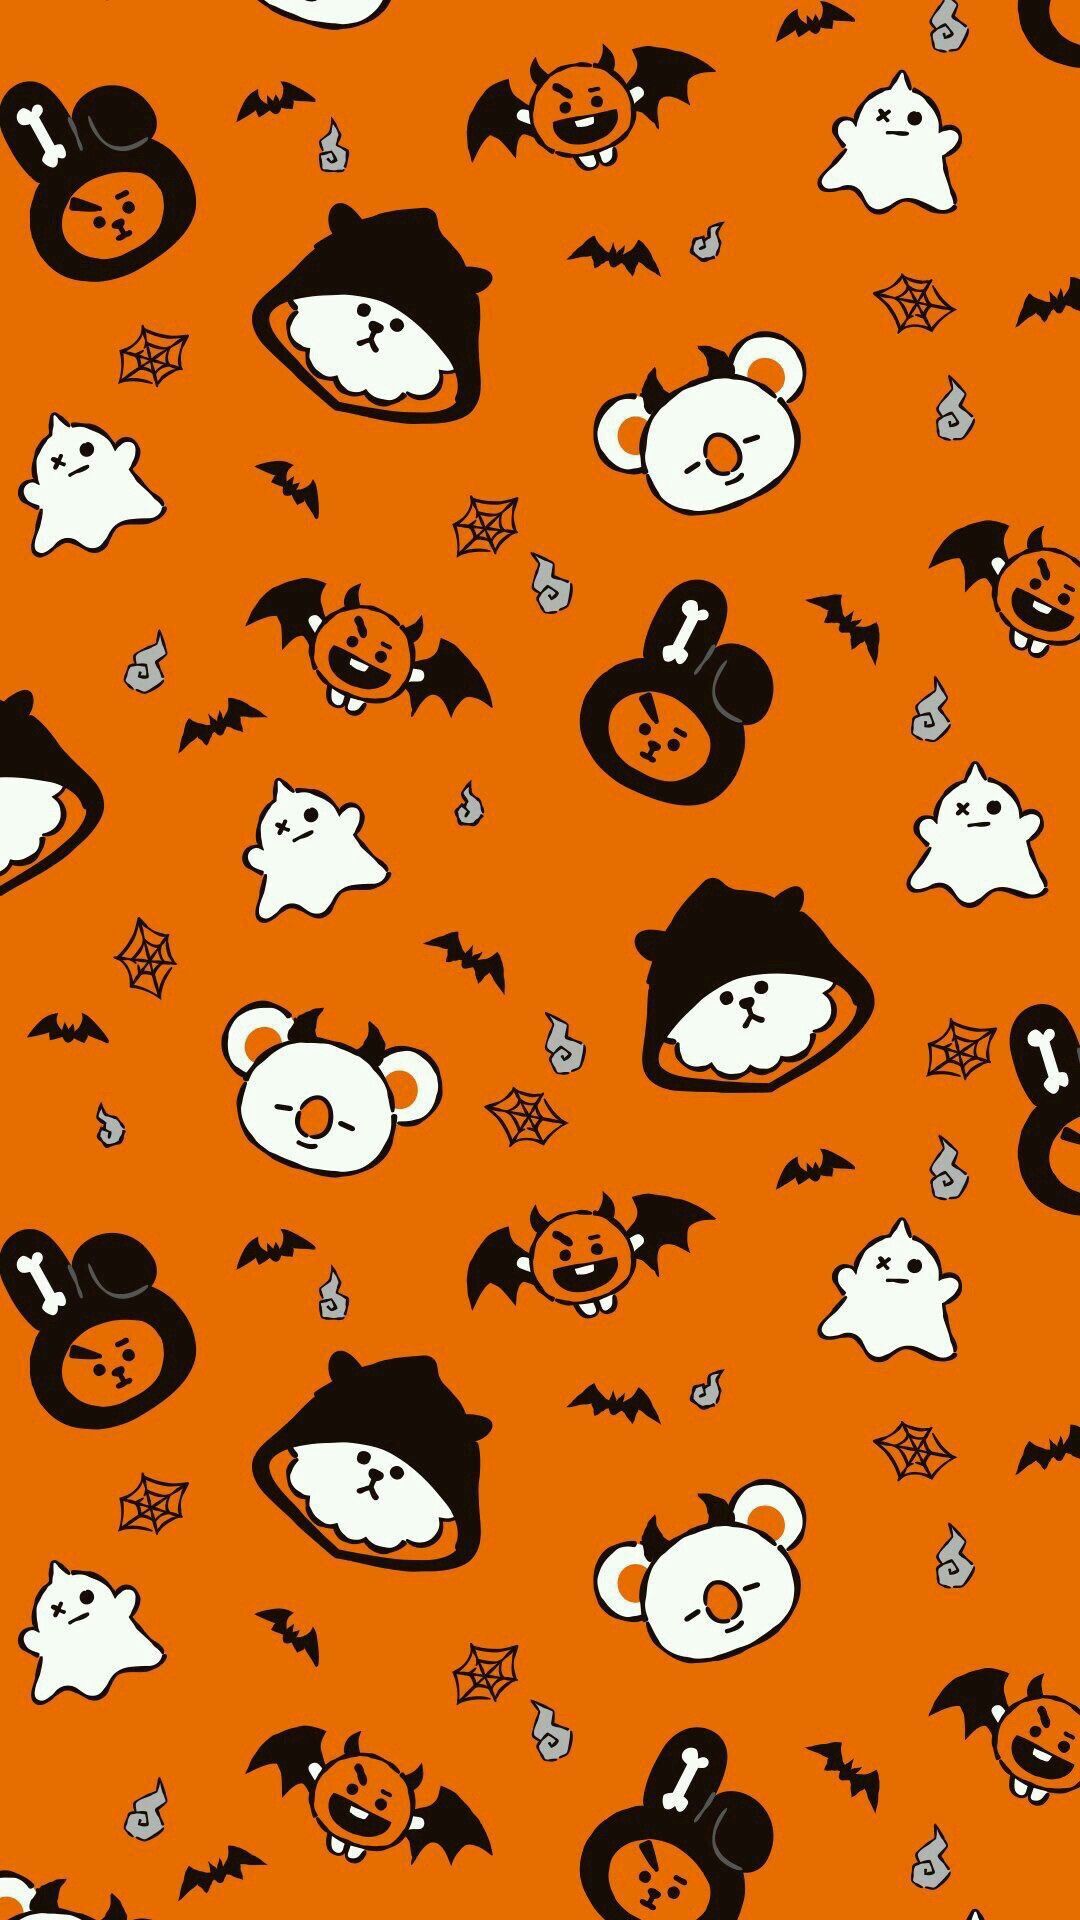 Bring the Halloween Spirit to Your Device